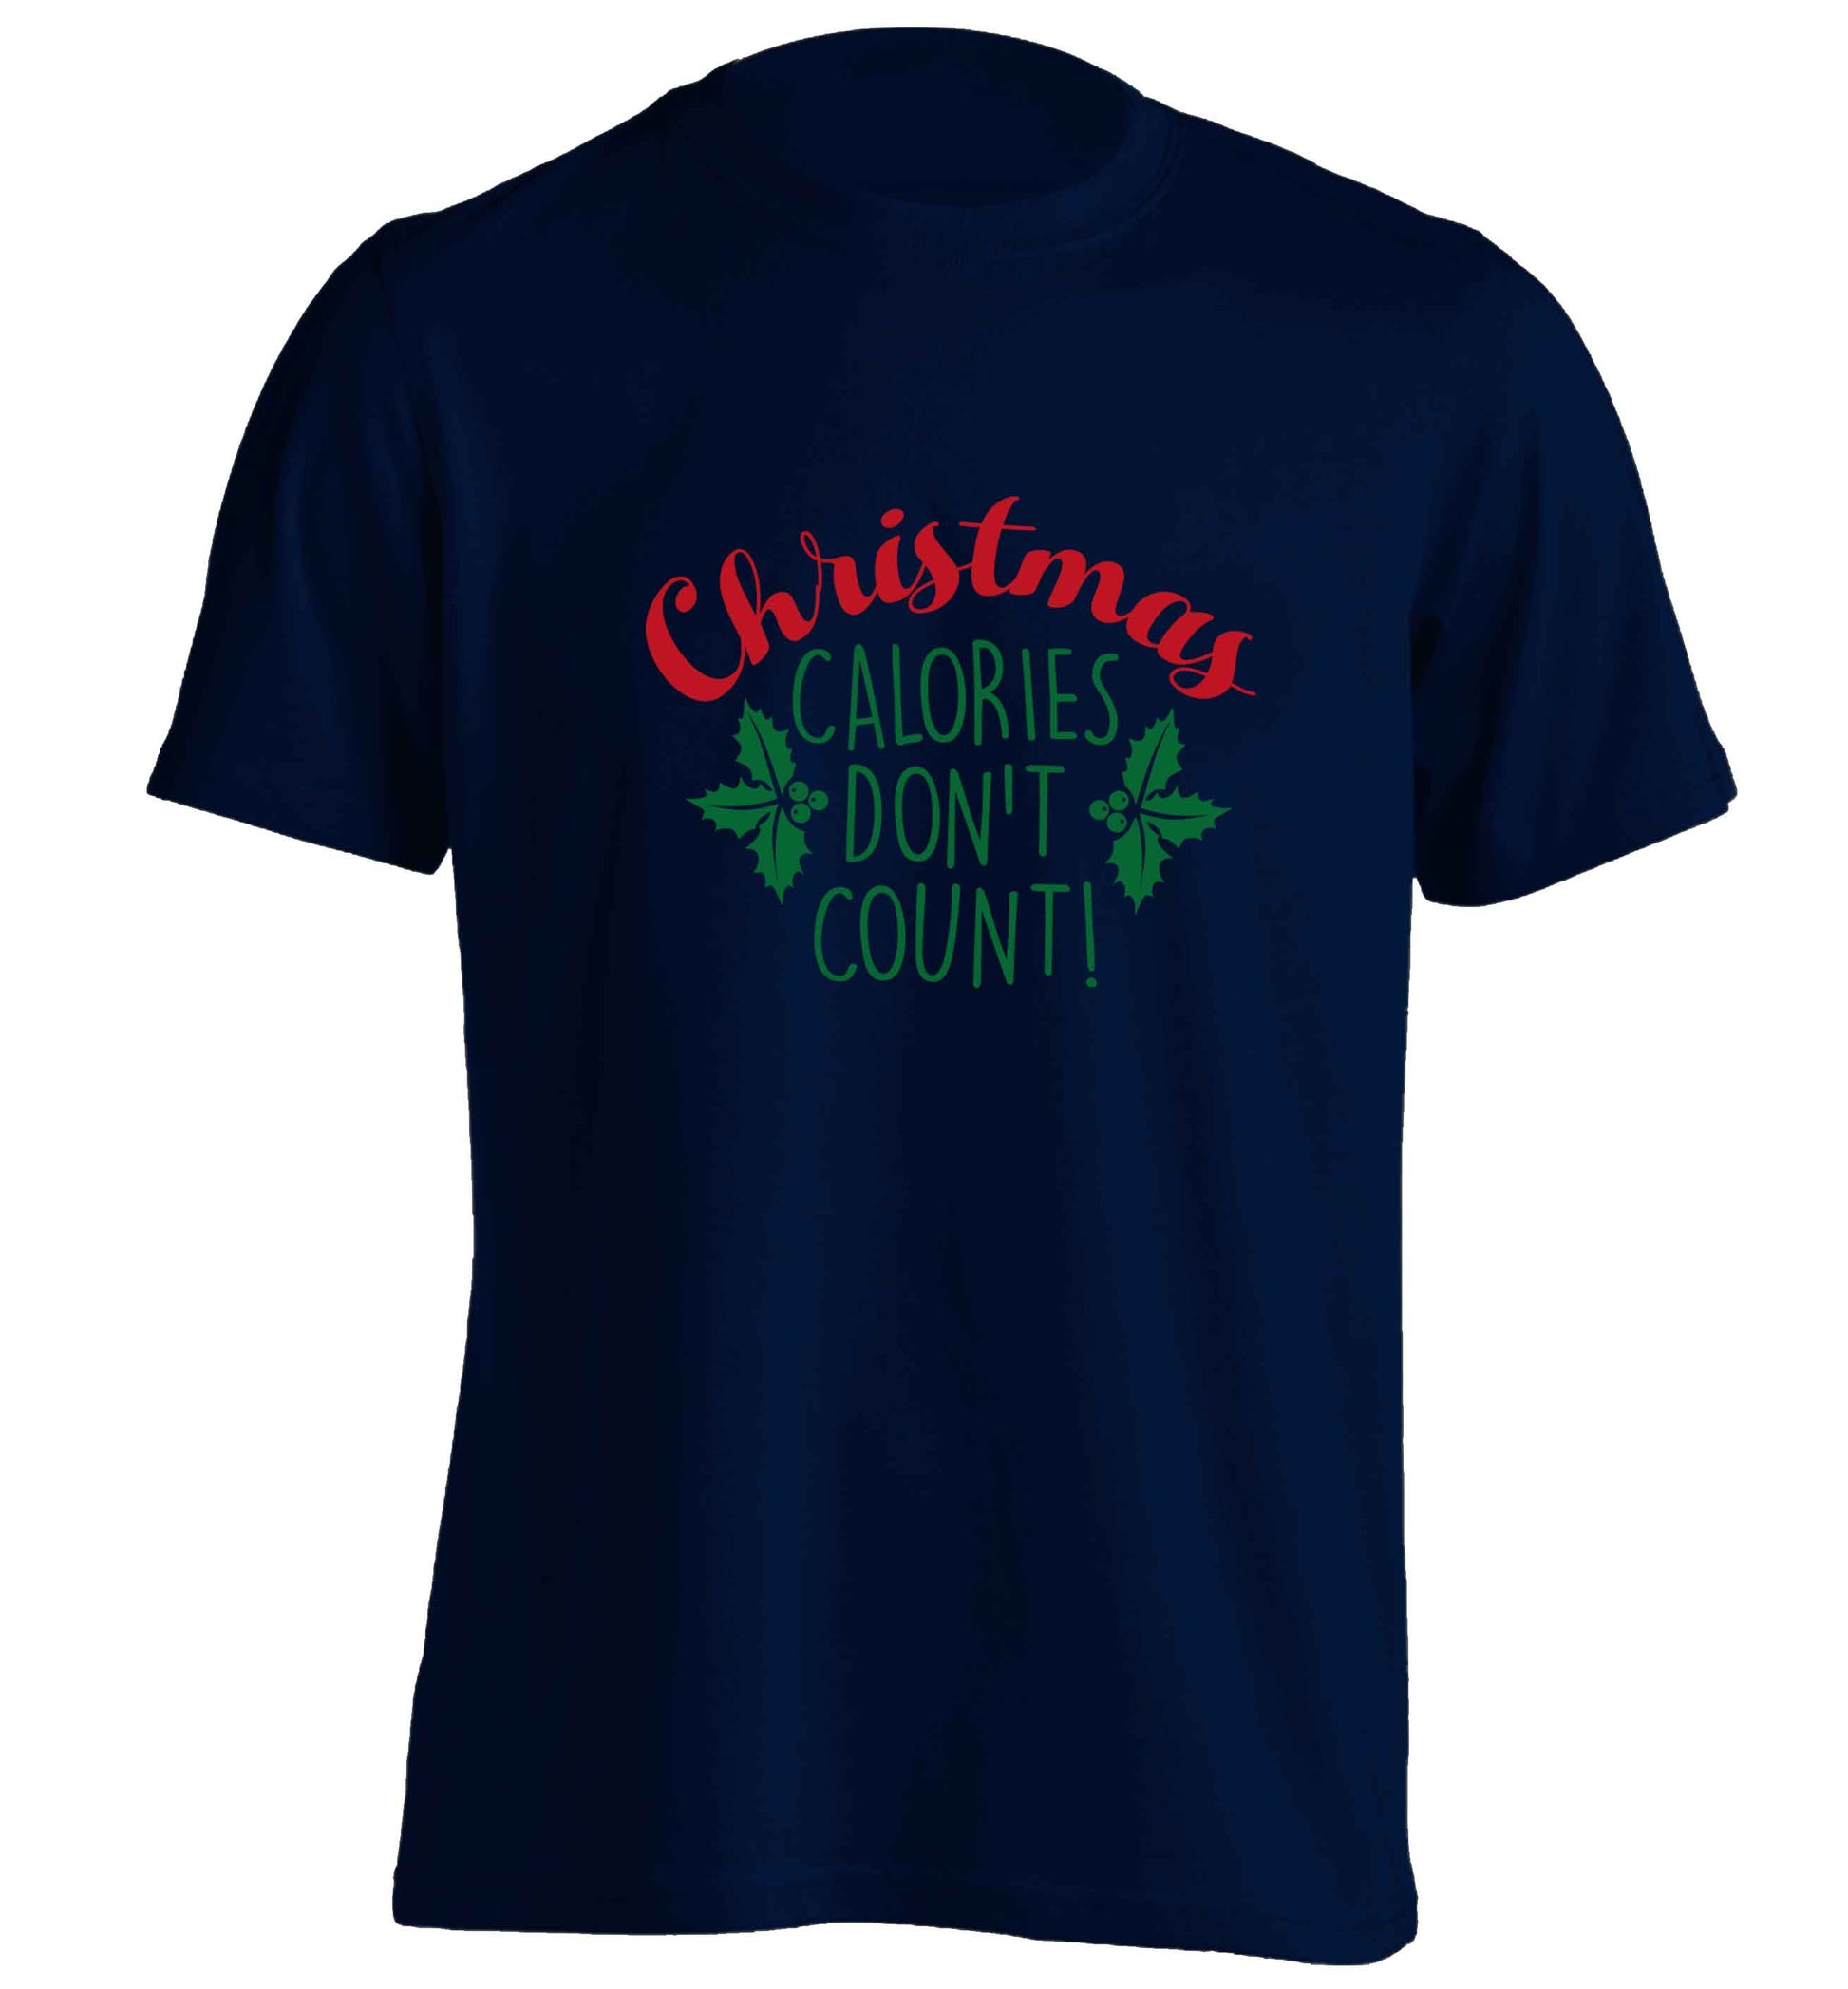 Christmas calories don't count adults unisex navy Tshirt 2XL